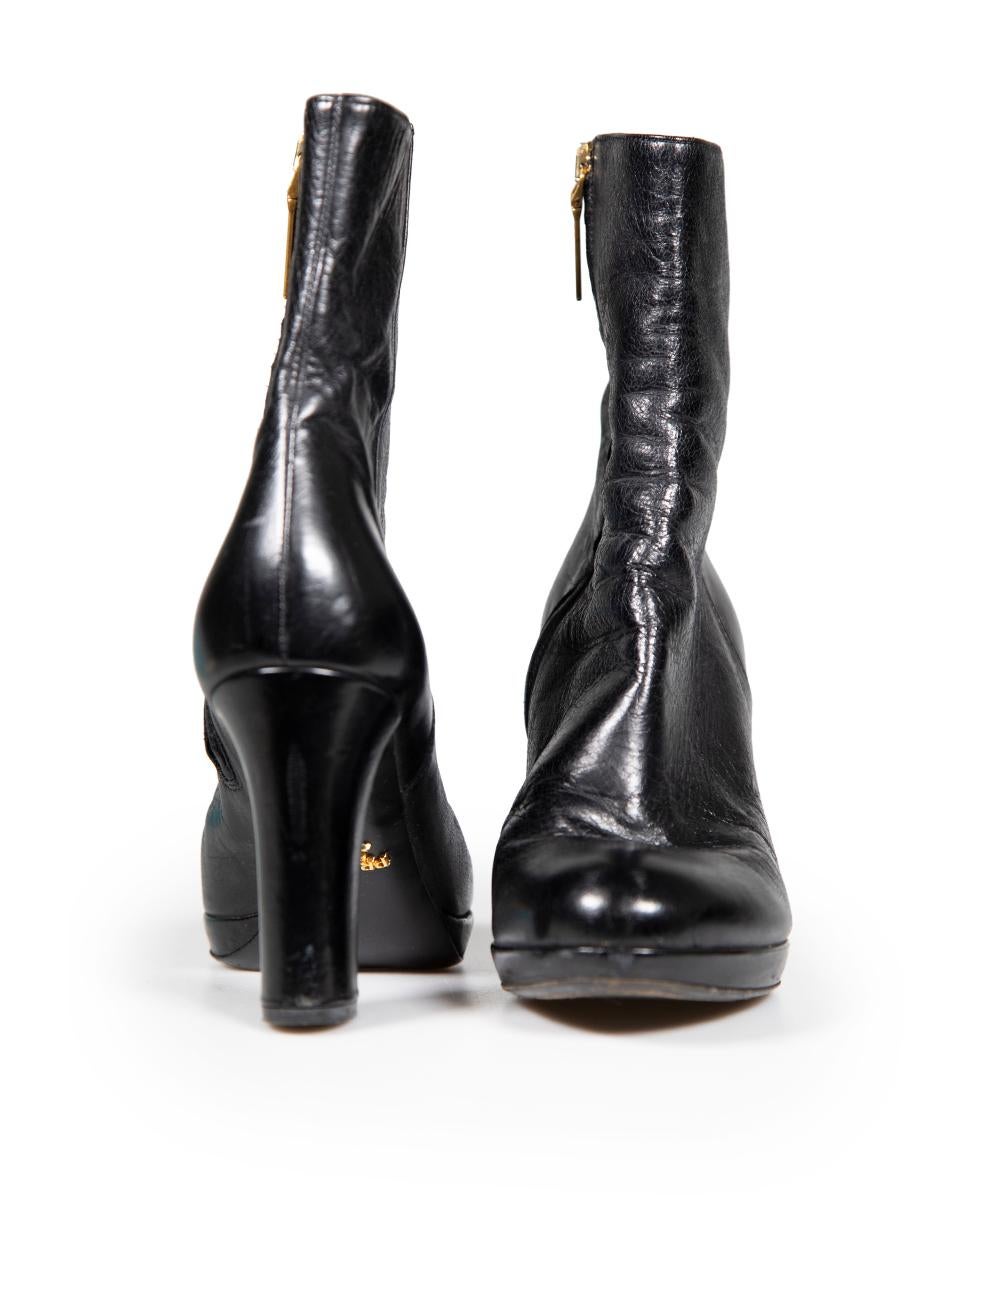 Prada Black Leather Round Toe Ankle Boots Size IT 36 In Good Condition For Sale In London, GB